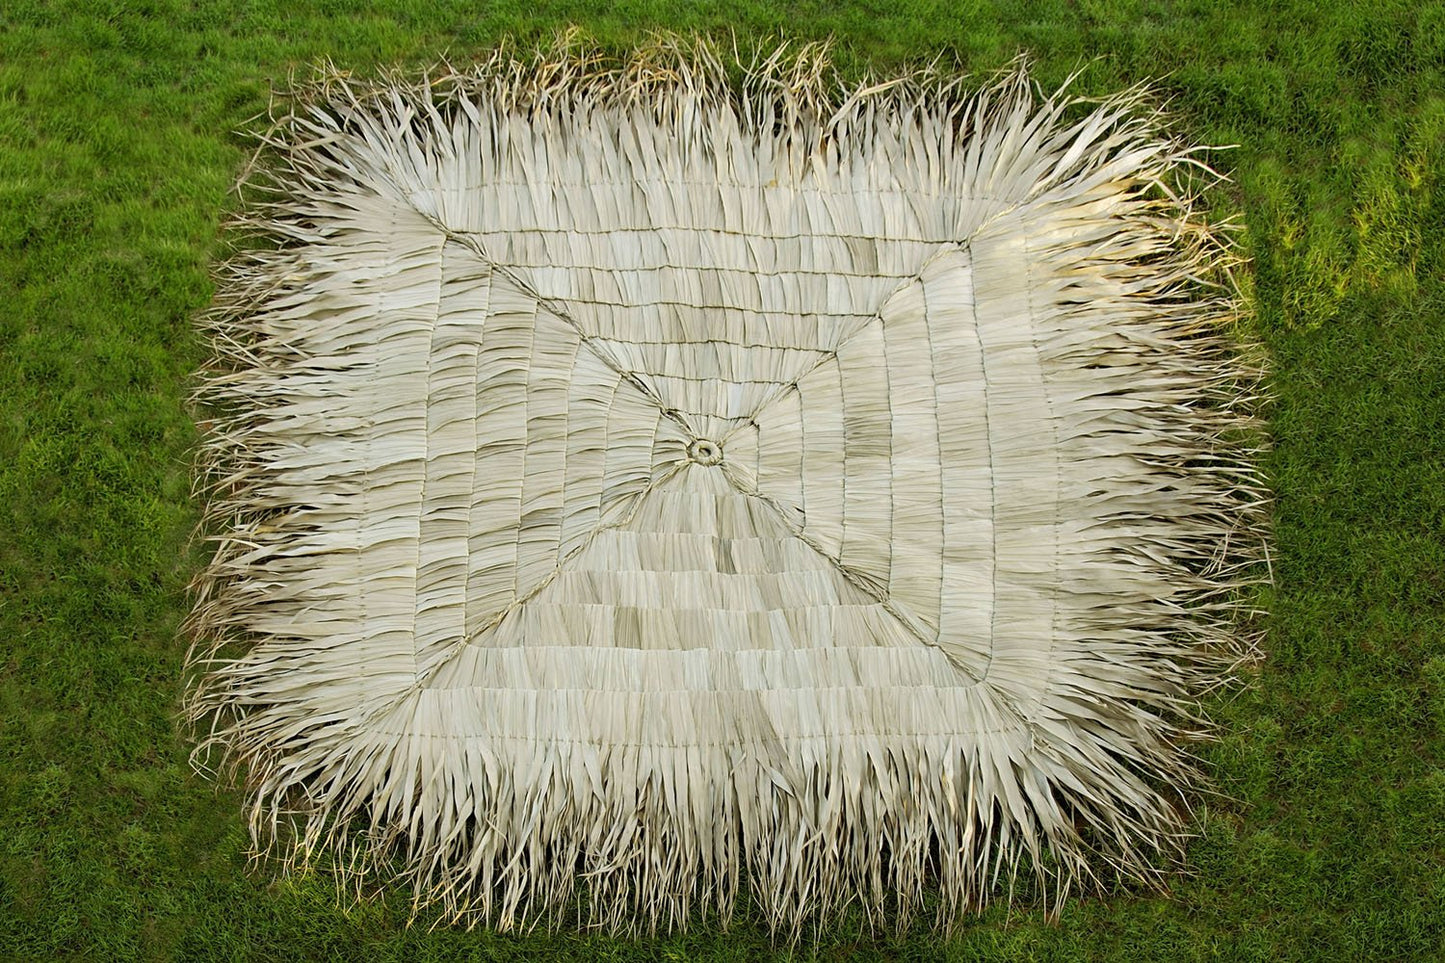 10' x 10' Square Asian Thatch Cover - My Store